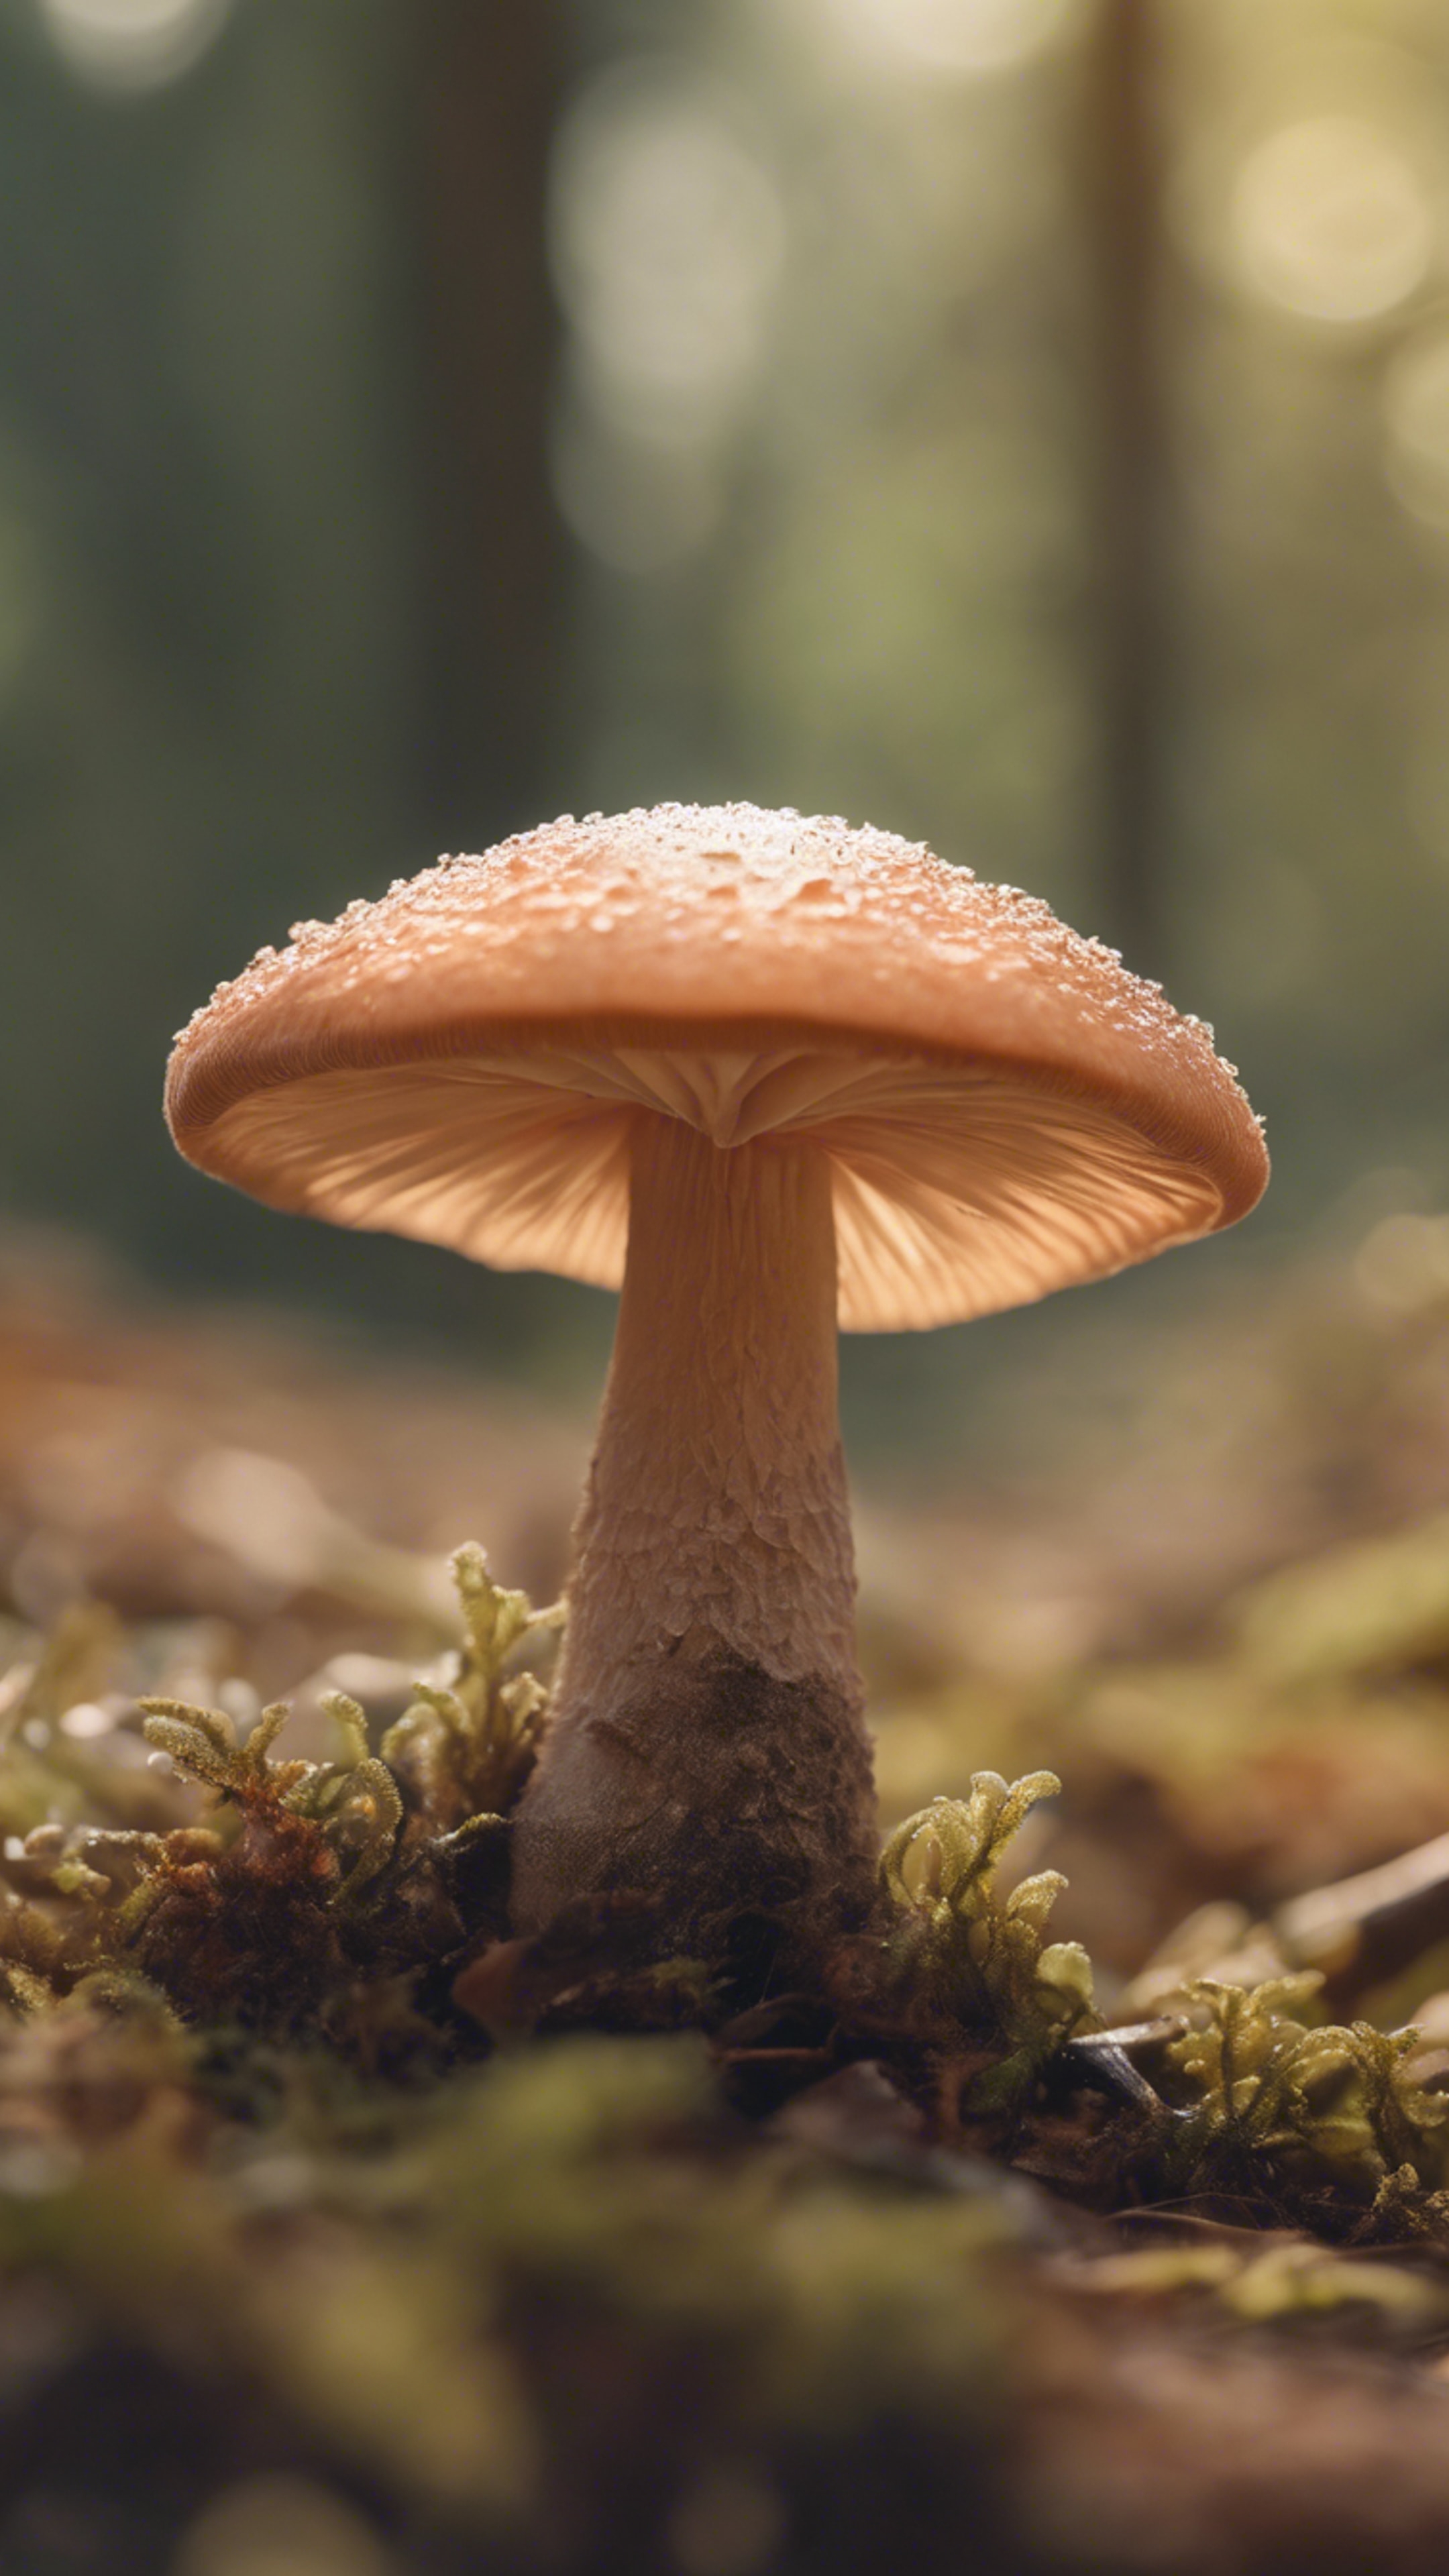 A close-up of a small, cute mushroom, peach color, with soft, sunlit forest scenery in the background. ورق الجدران[125df3bad49b42d8bf38]